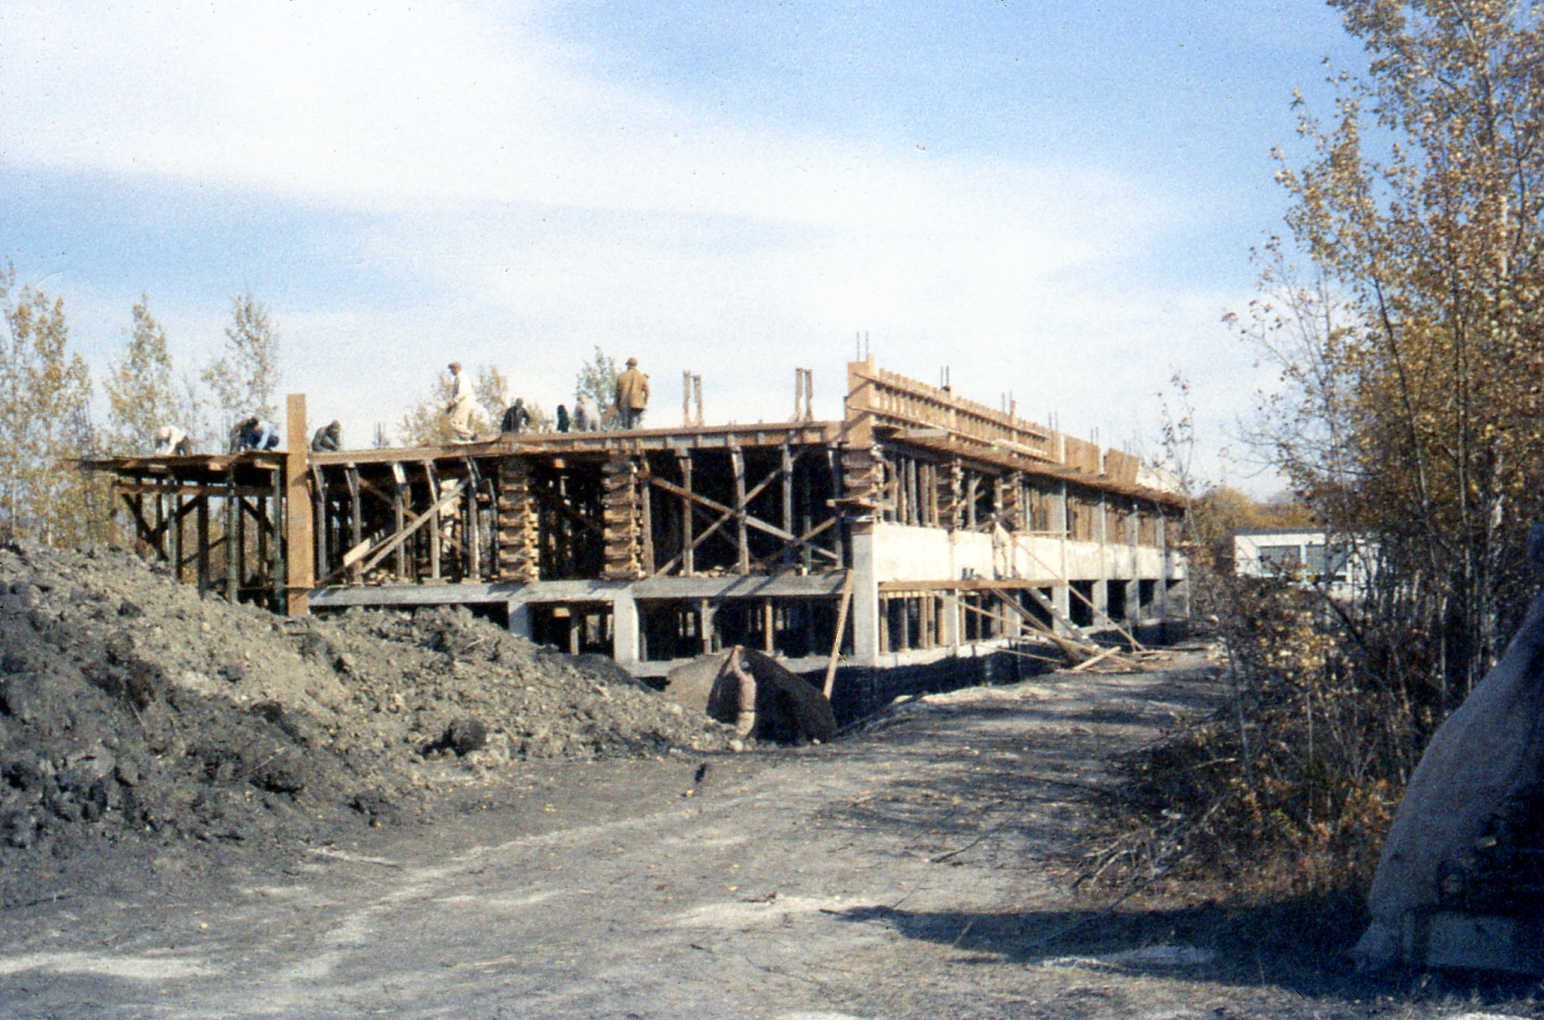 Construction of the Poettcker Hall residence in 1958